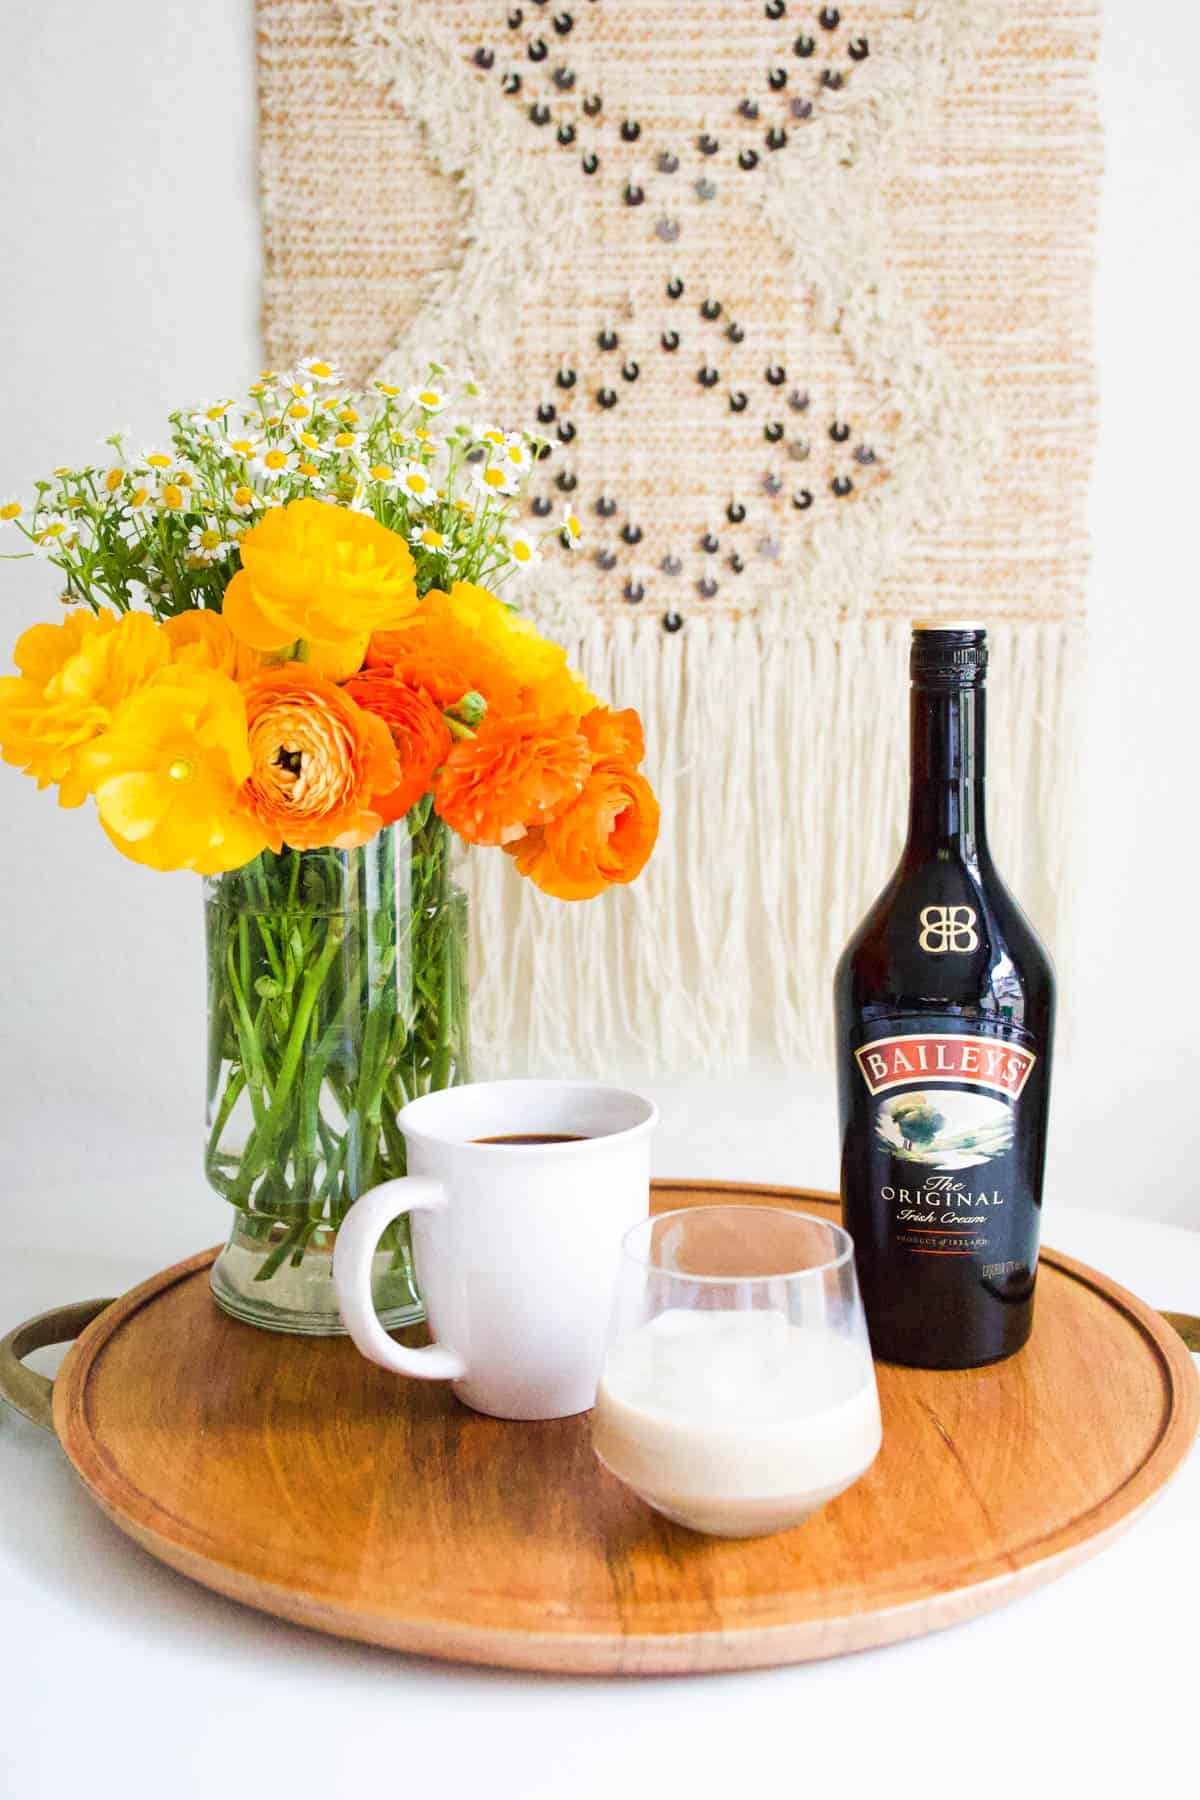 A tray on a table with a vase of flowers and a bottle of Irish Cream next to a cup of coffee and a cocktail glass.